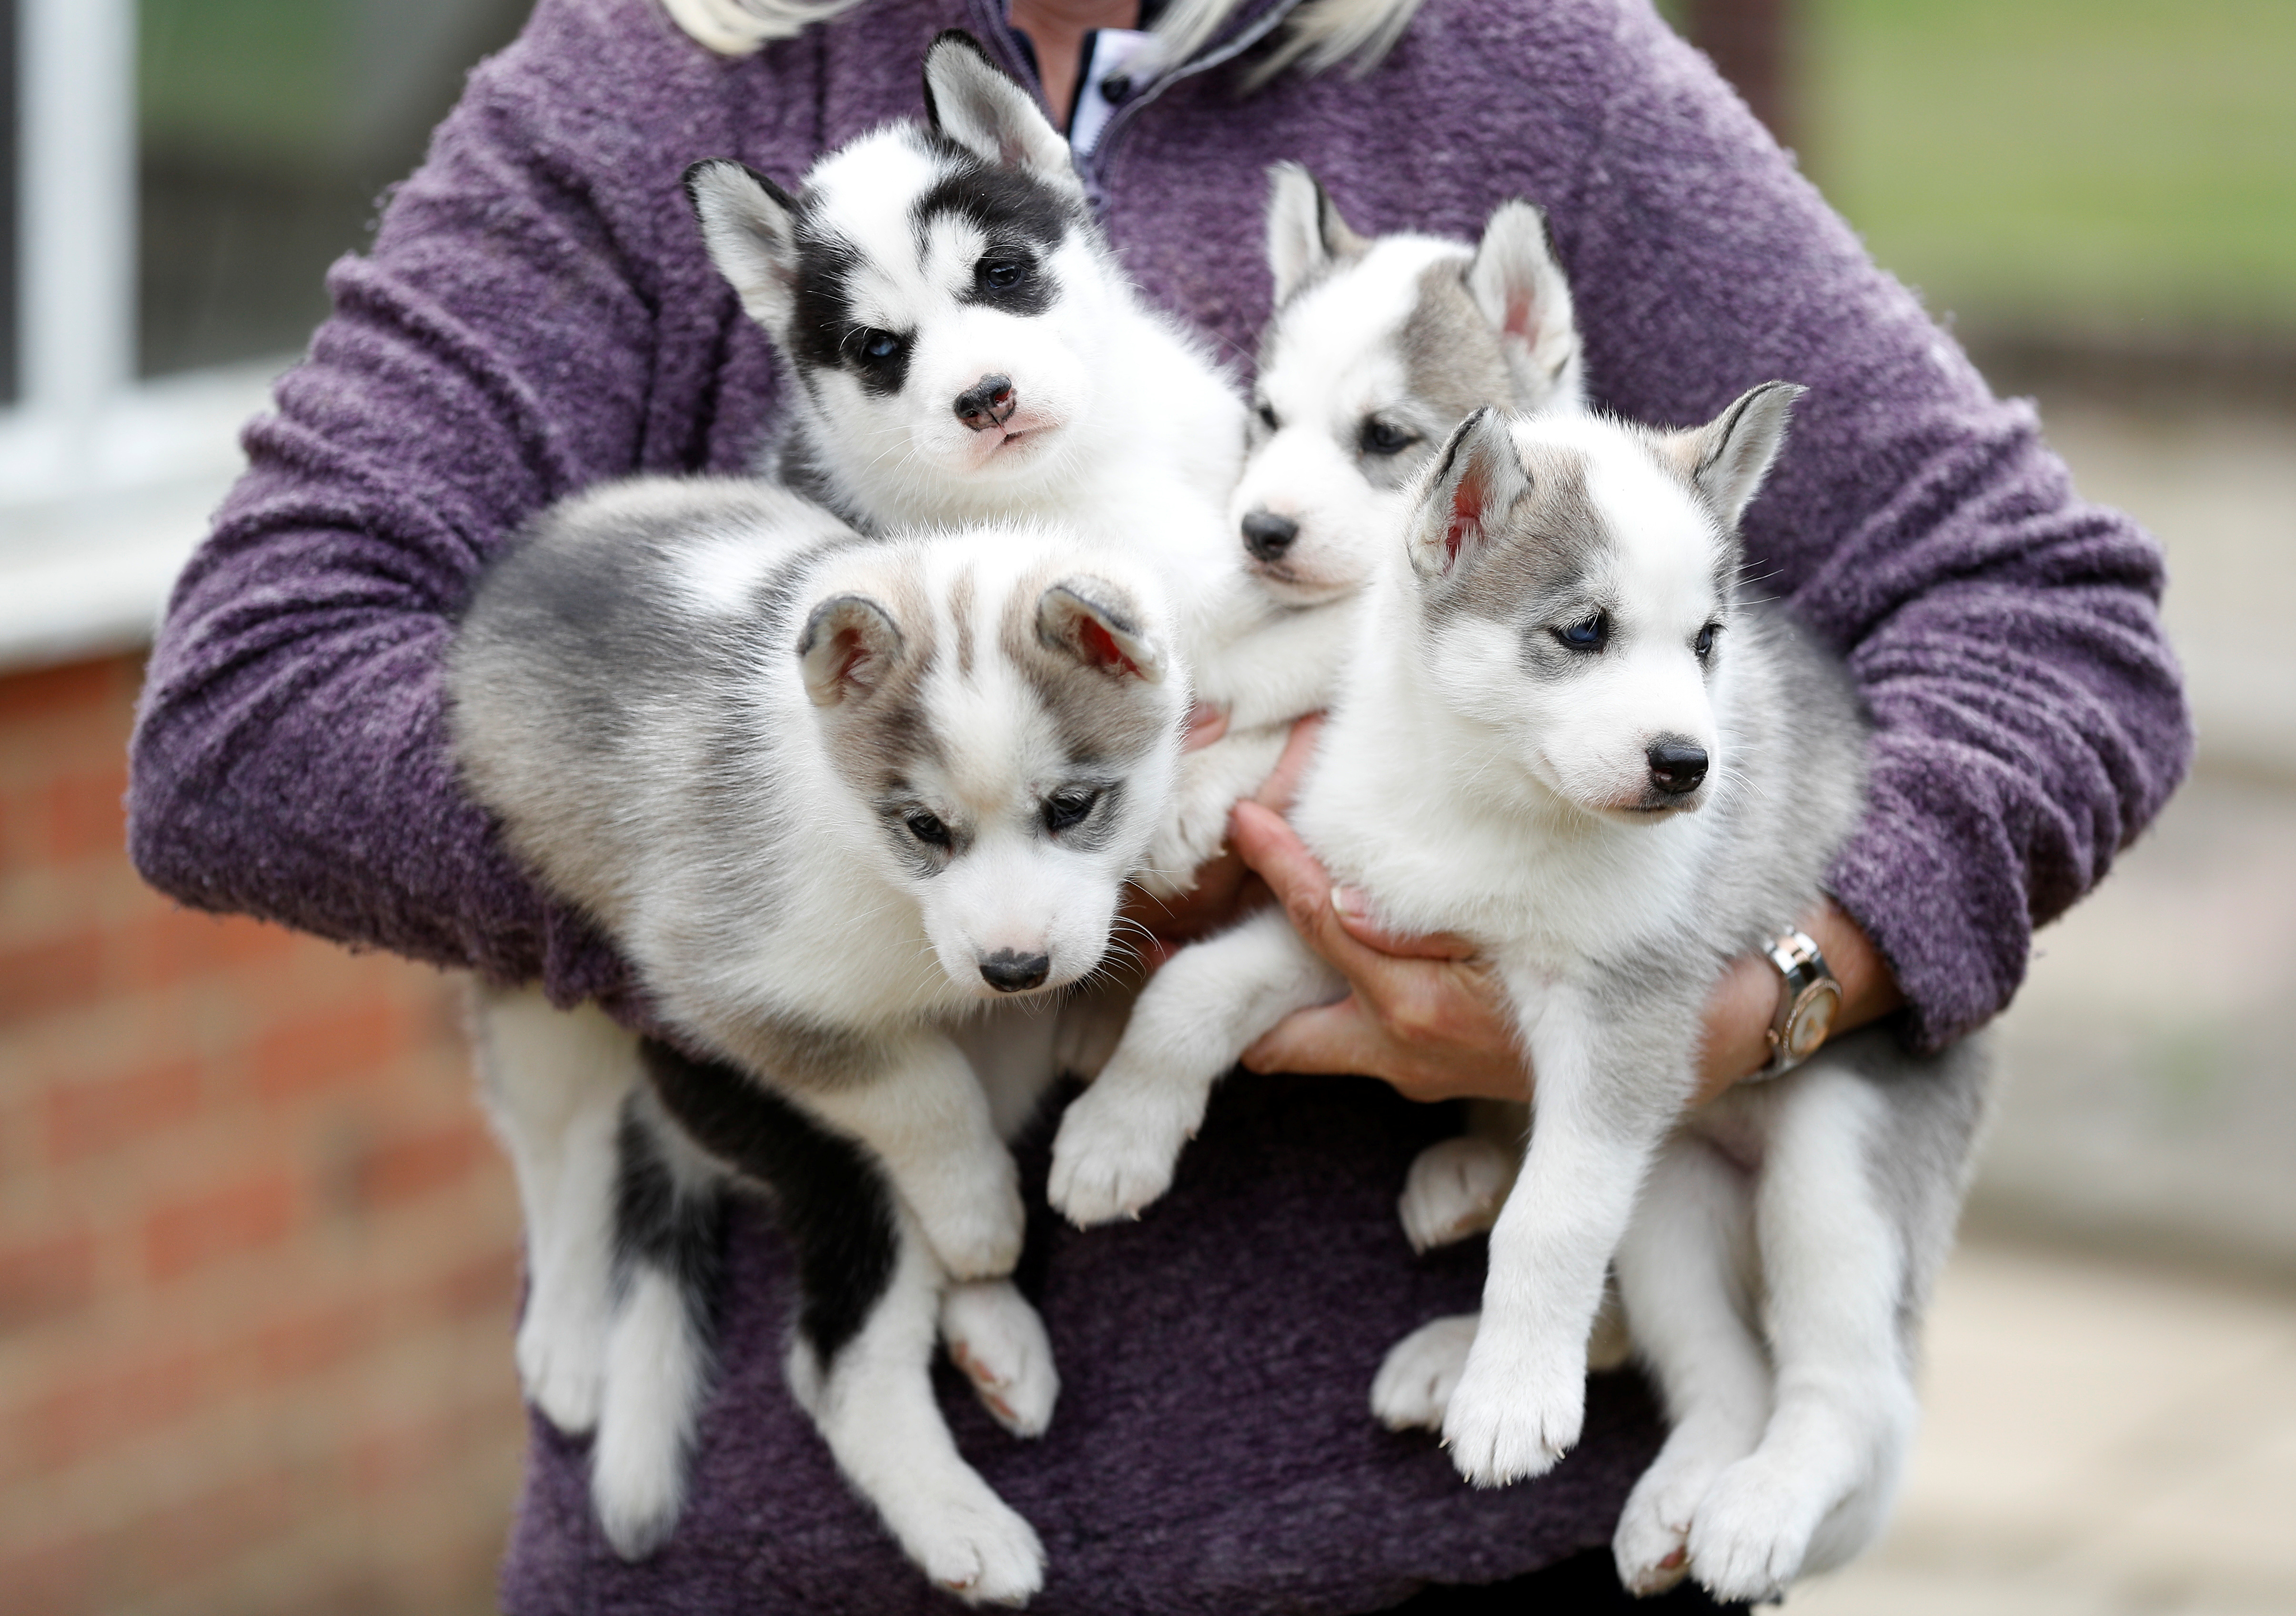 Siberian Husky breeder Christine Biddlecombe poses for a photograph with her five-week-old puppies at her home, in Tonbridge